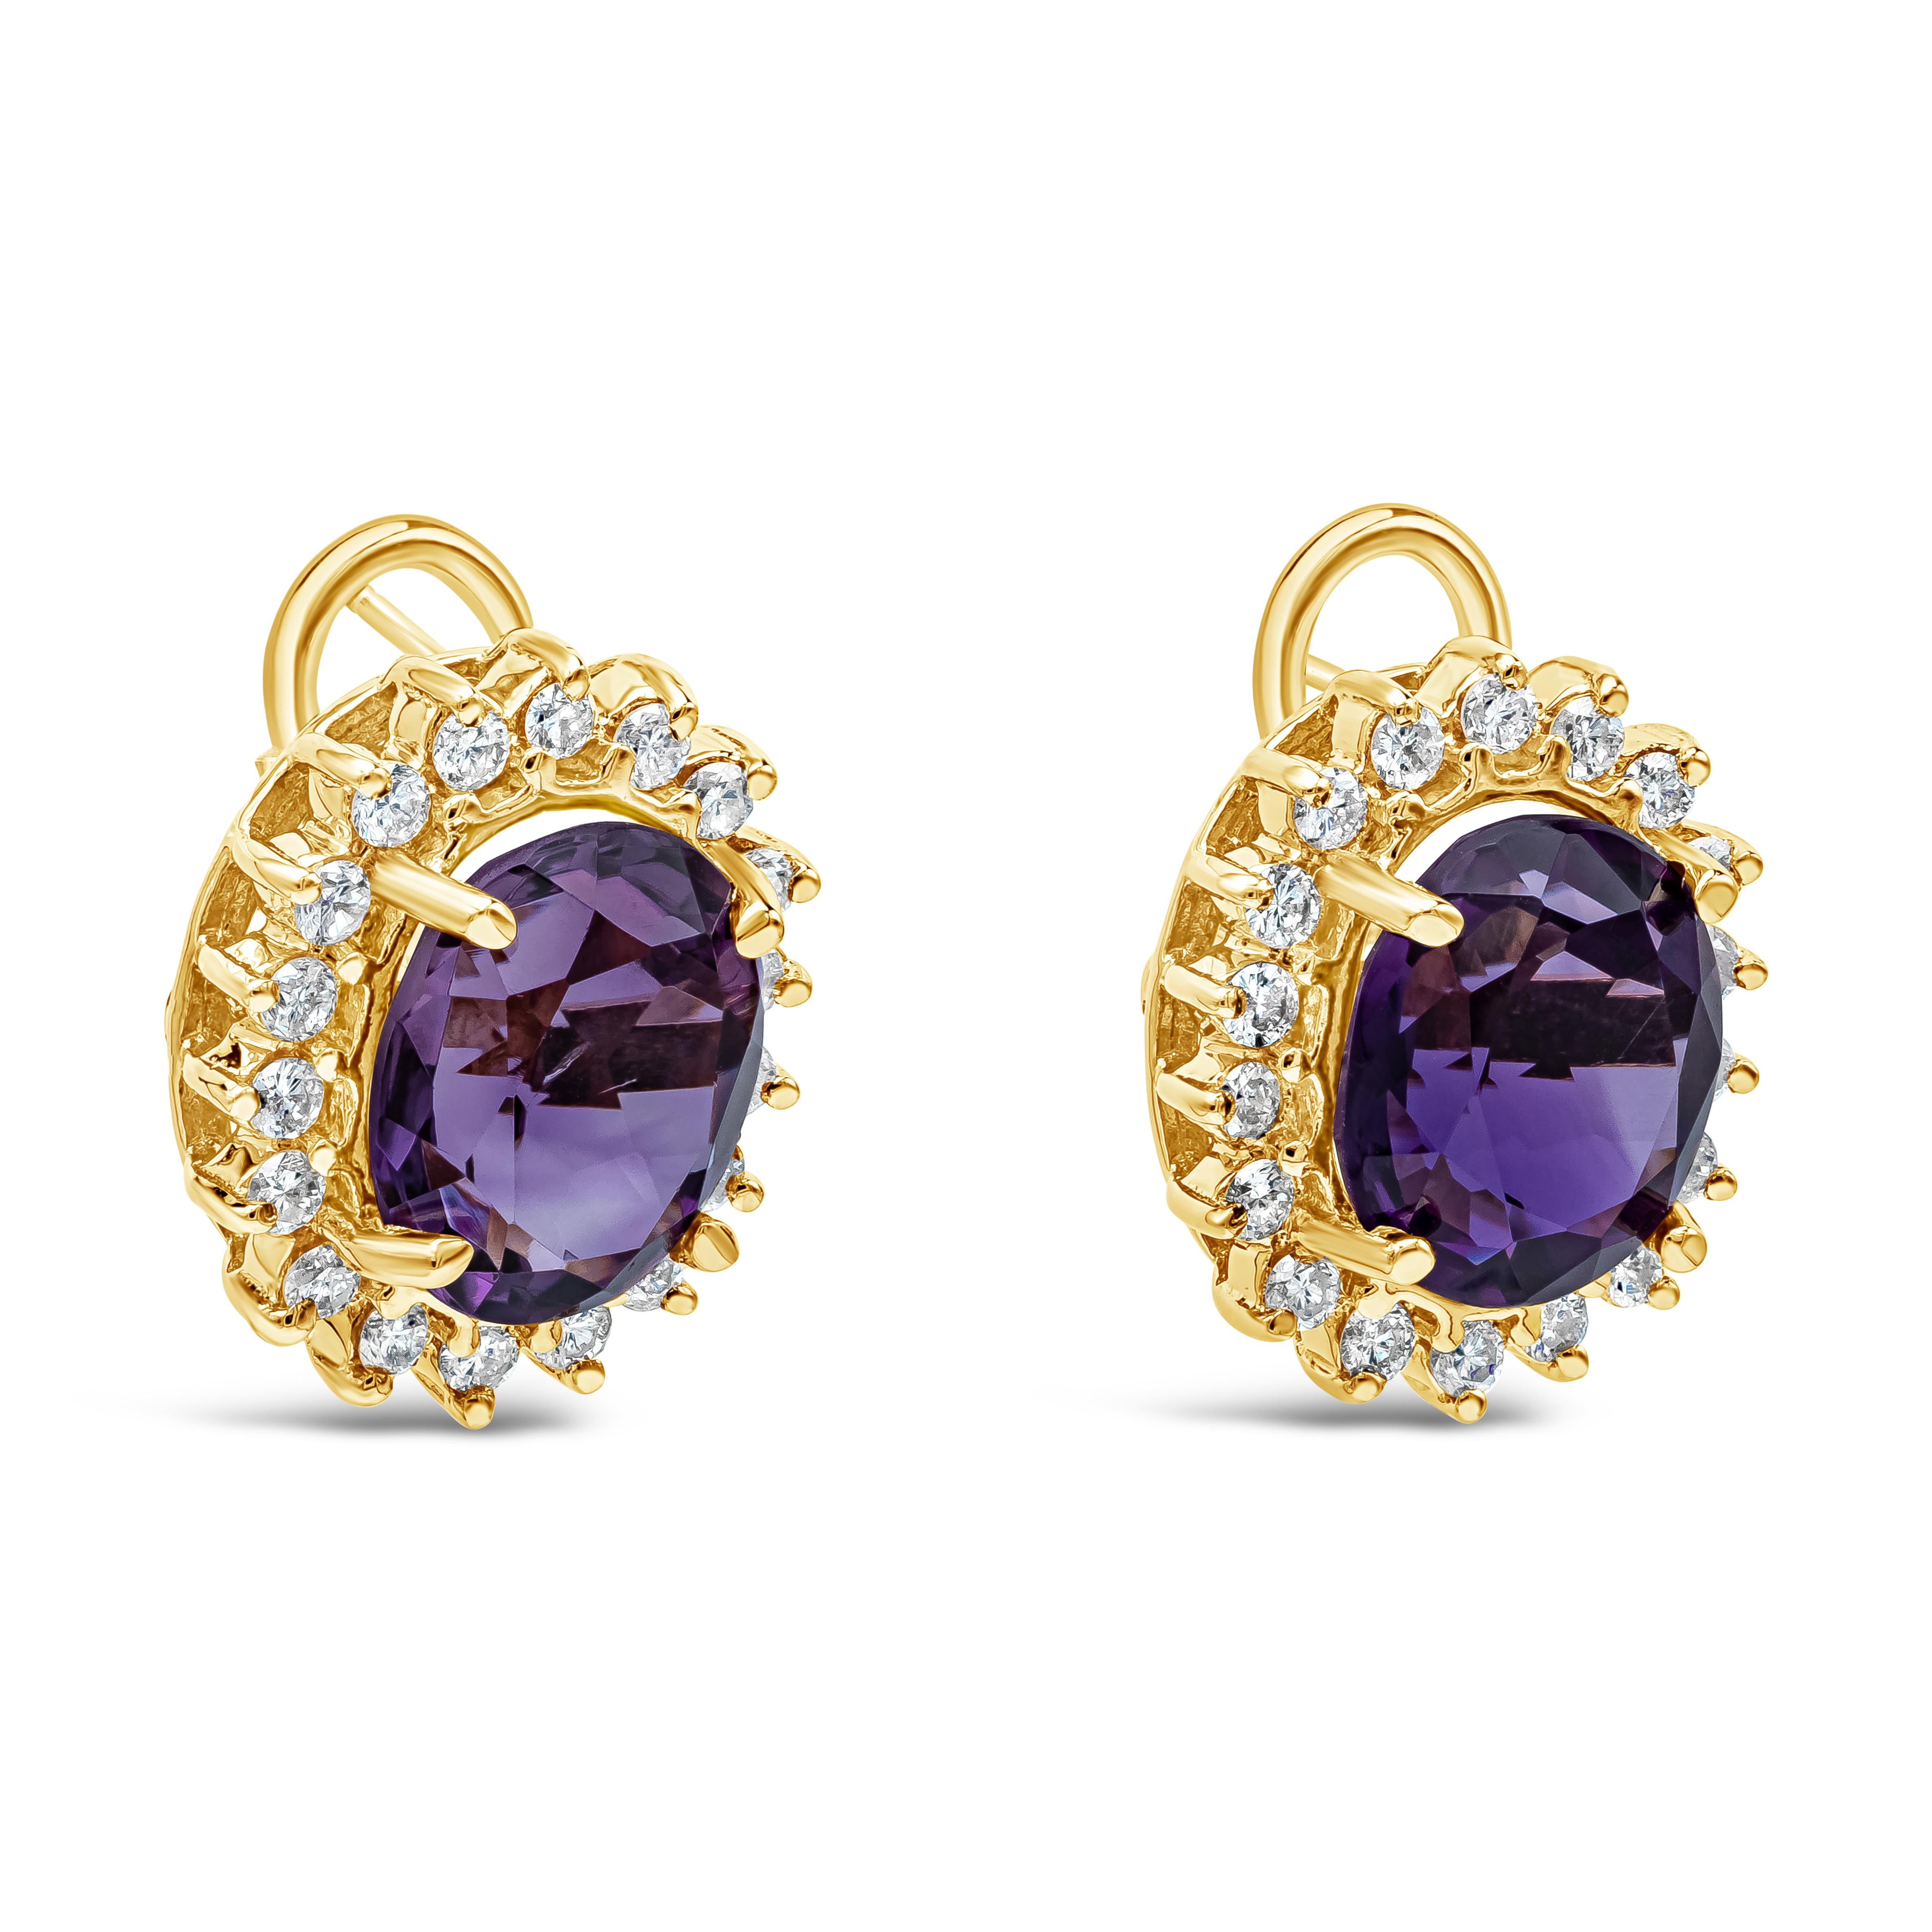 Features two color-rich oval cut amethysts weighing 9.00 carats total, set in a classic four prong basket setting and surrounded by a single row of round brilliant diamonds in a halo design. Diamonds weigh 1.45 carats total and are approximately G-H